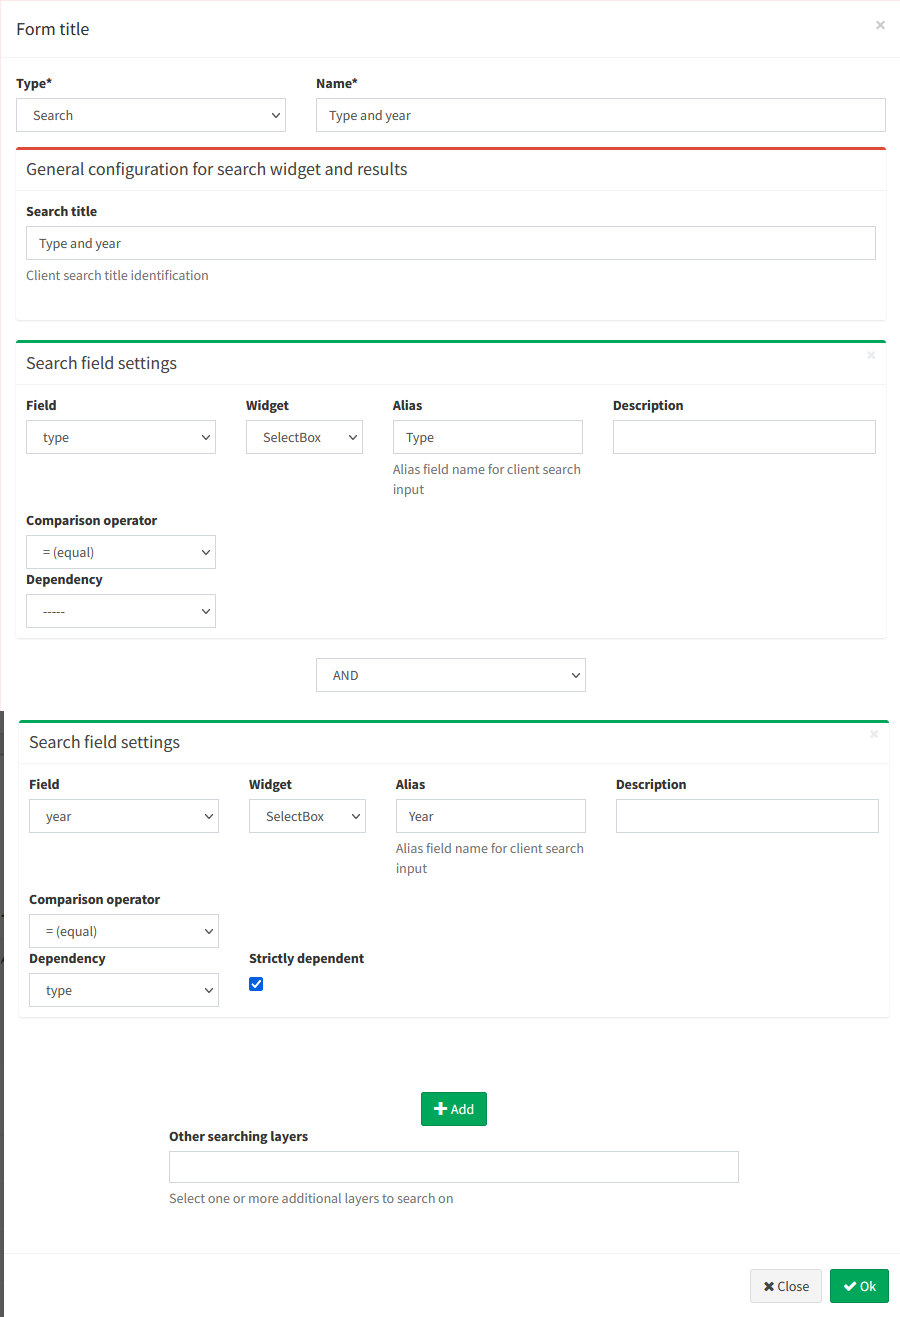 _images/g3wsuite_administration_project_search_form.png